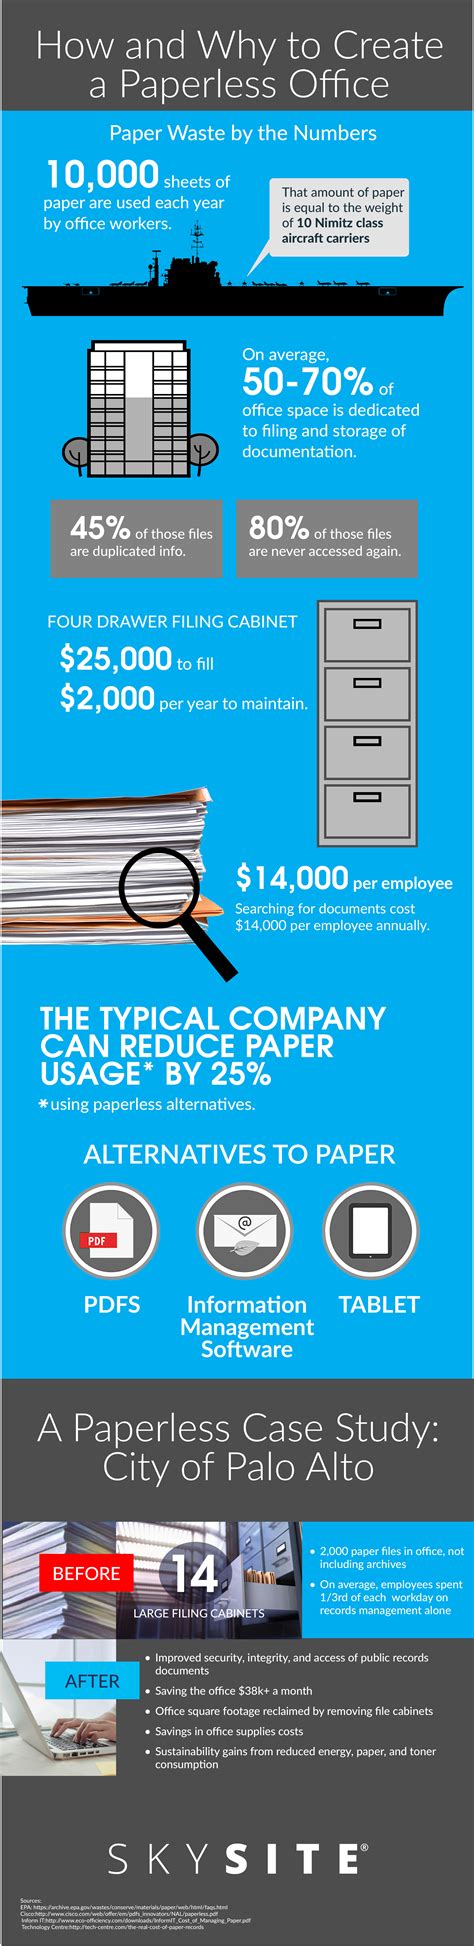 How And Why To Create A Paperless Office Infographic